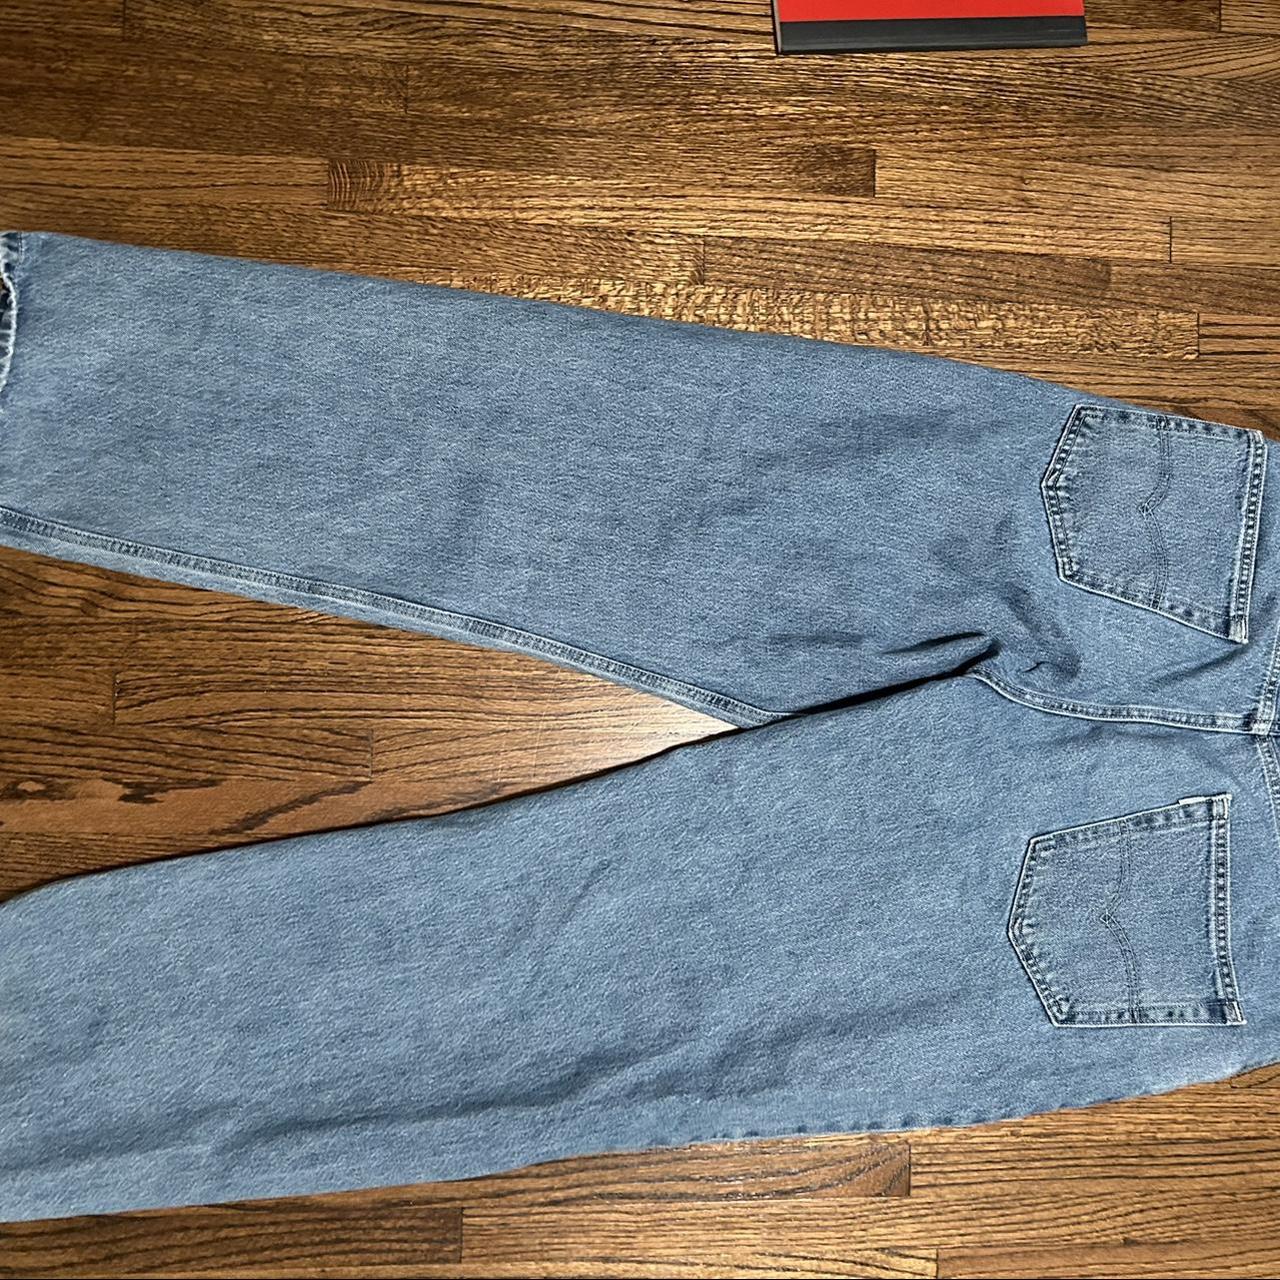 Levi’s silver tab baggy nice baggy fit and super... - Depop